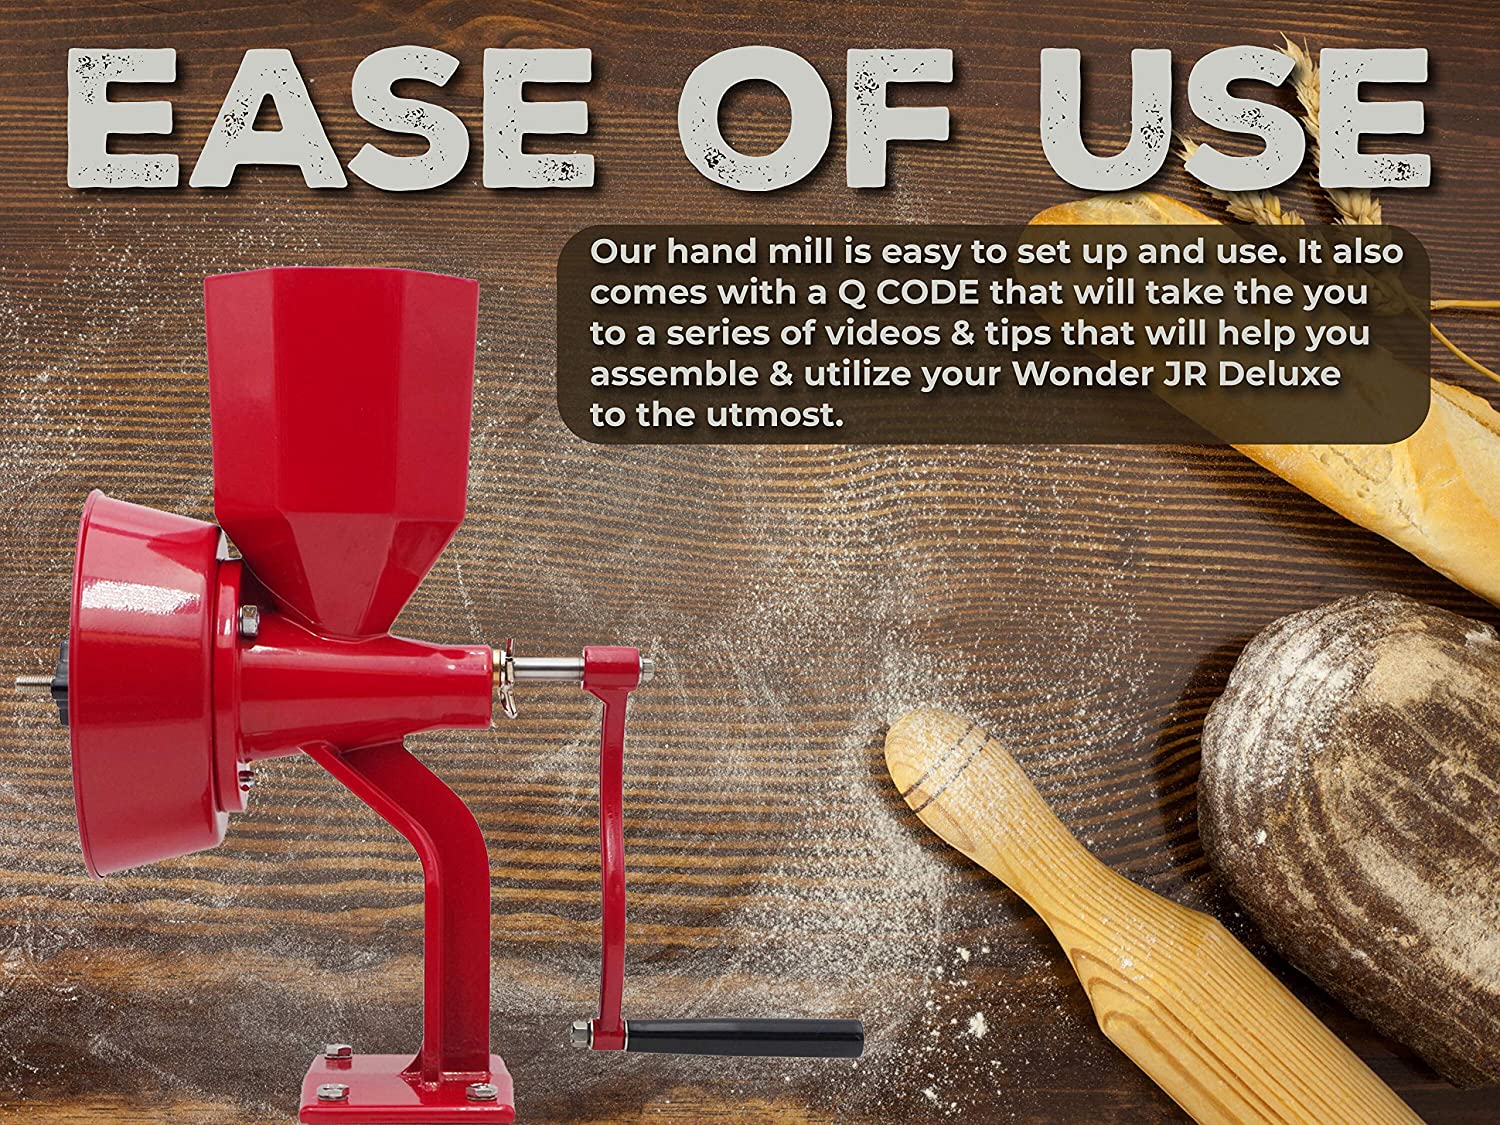 A red manual bread grinder with ease of use.